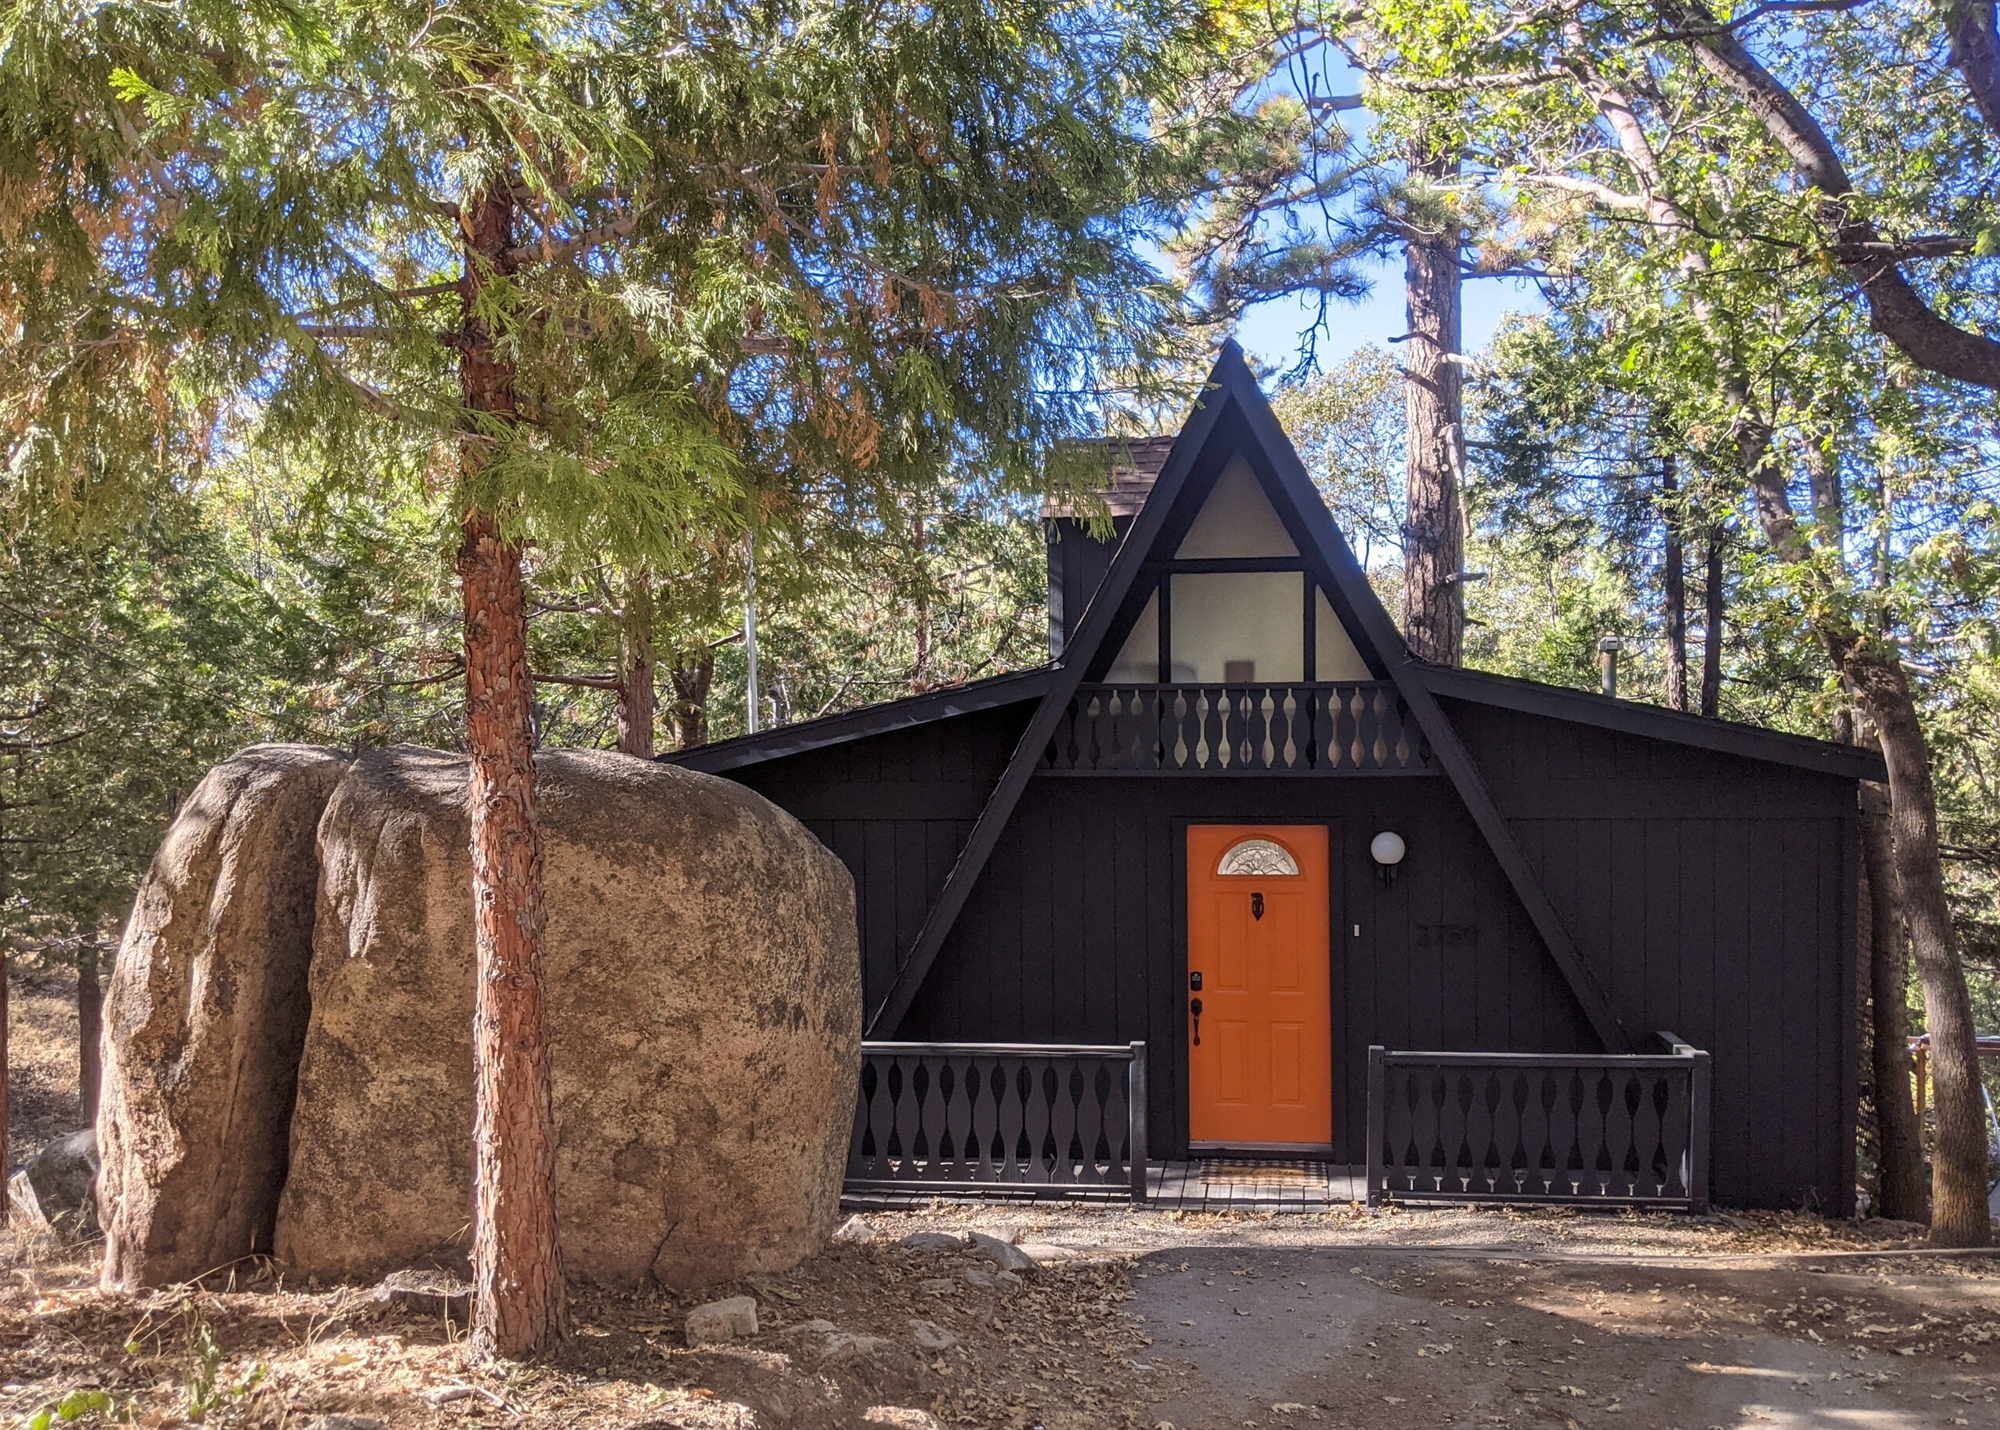 Exterior view of a brown A-frame cabin with an orange door called Hideout at Split Rock located in Lake Arrowhead, California.